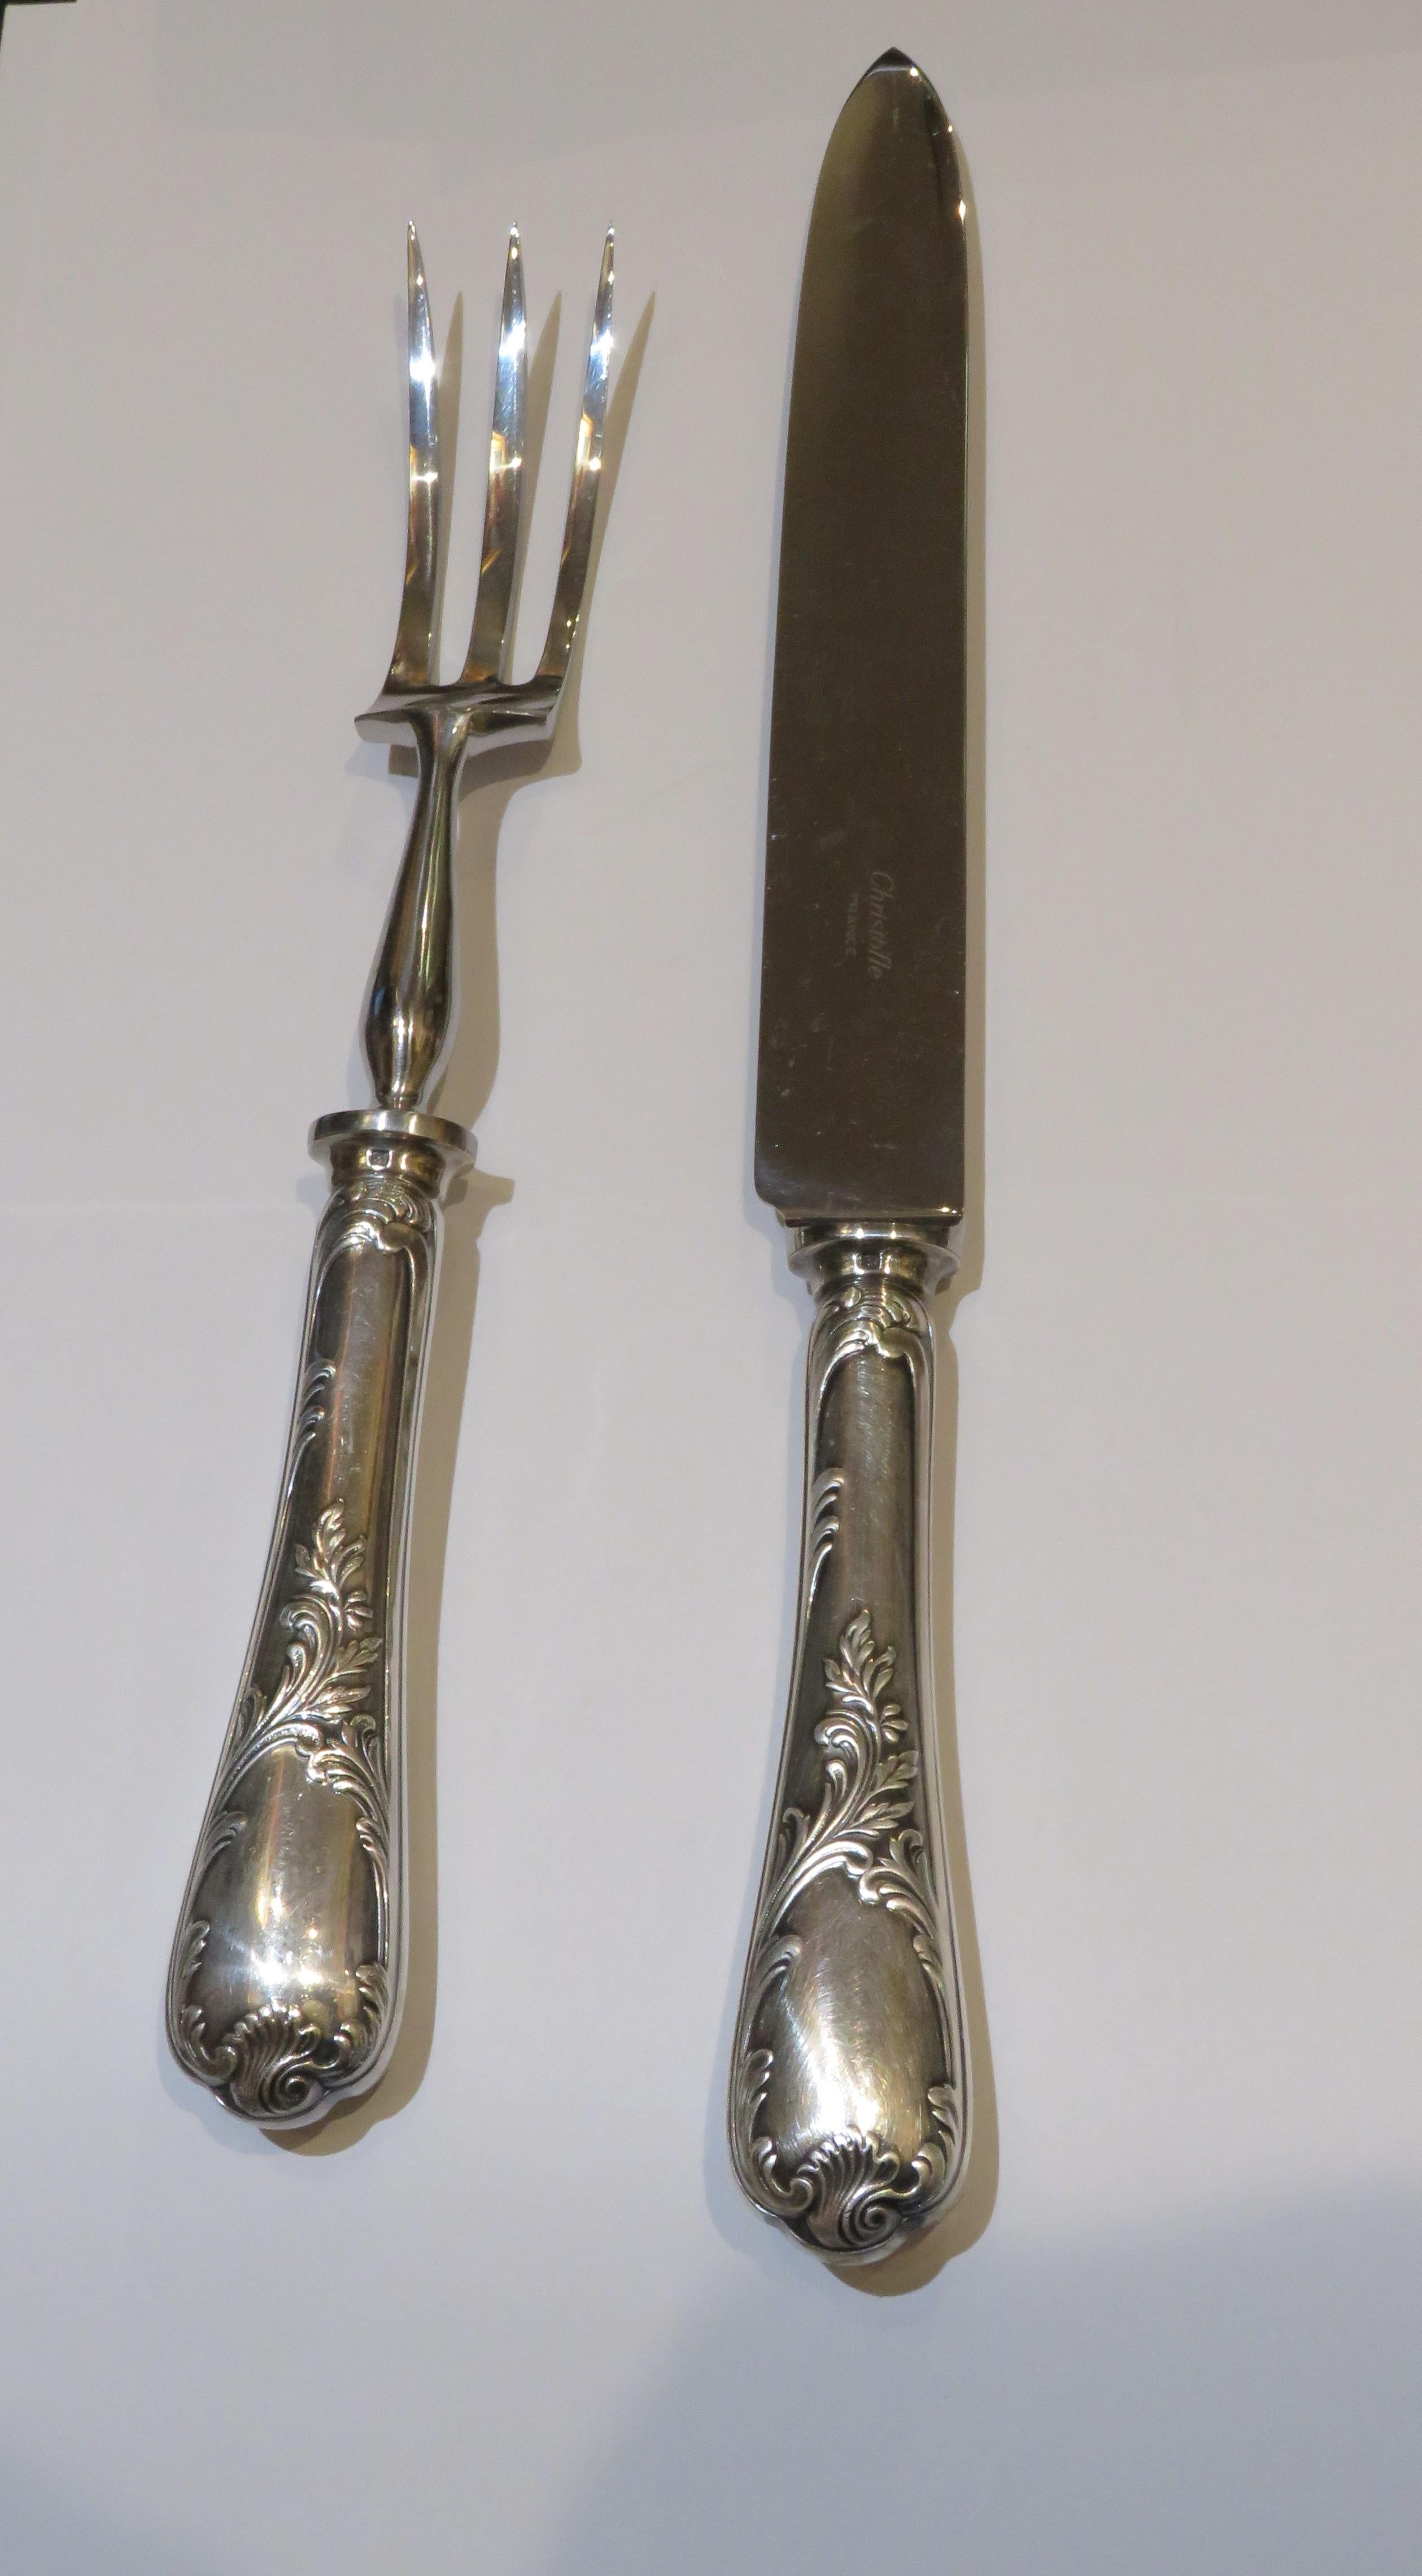 The Following Items we are offering is an Outstanding Pair of Beautiful Rare Set of 2 Christofle Silver Carving Knife and Fork Pieces. Taken out of an Important Park Avenue New York City Estate.